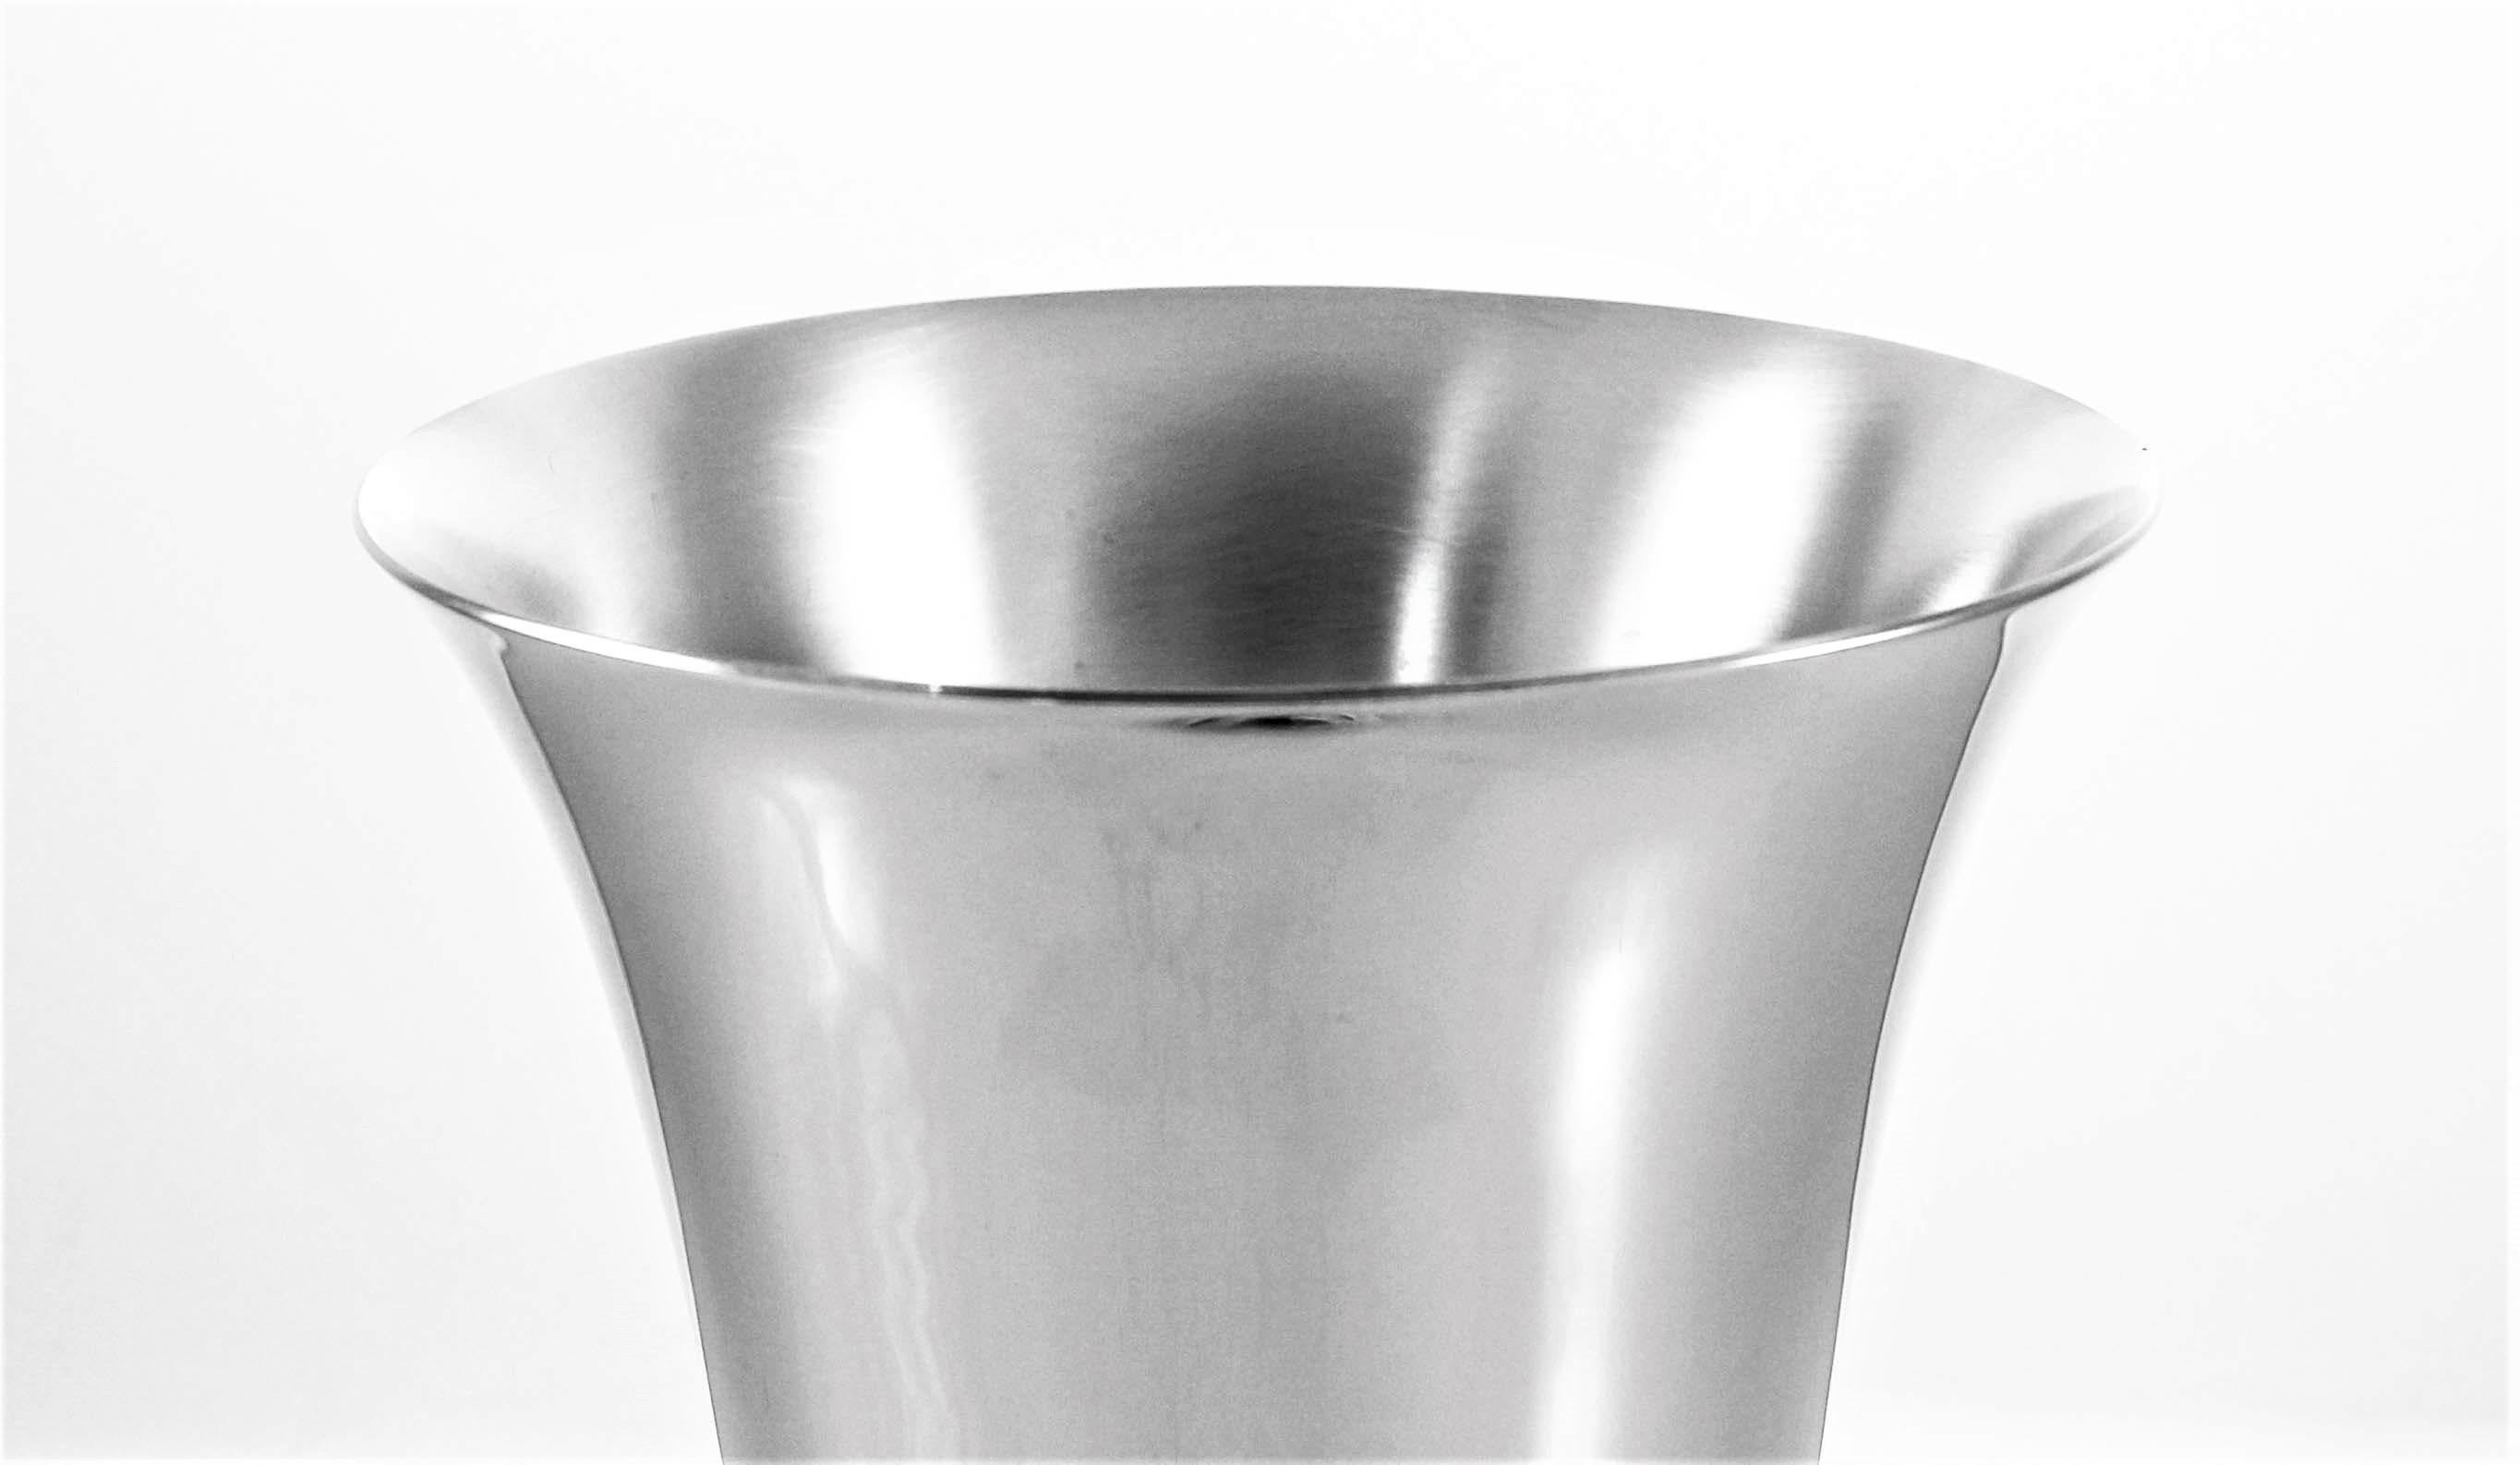 We are proud to offer this Art Deco sterling silver vase. Art Deco combined modernist styles with fine craftsmanship and rich materials. During its heyday, Art Deco represented luxury, glamour, exuberance, and faith in social and technological